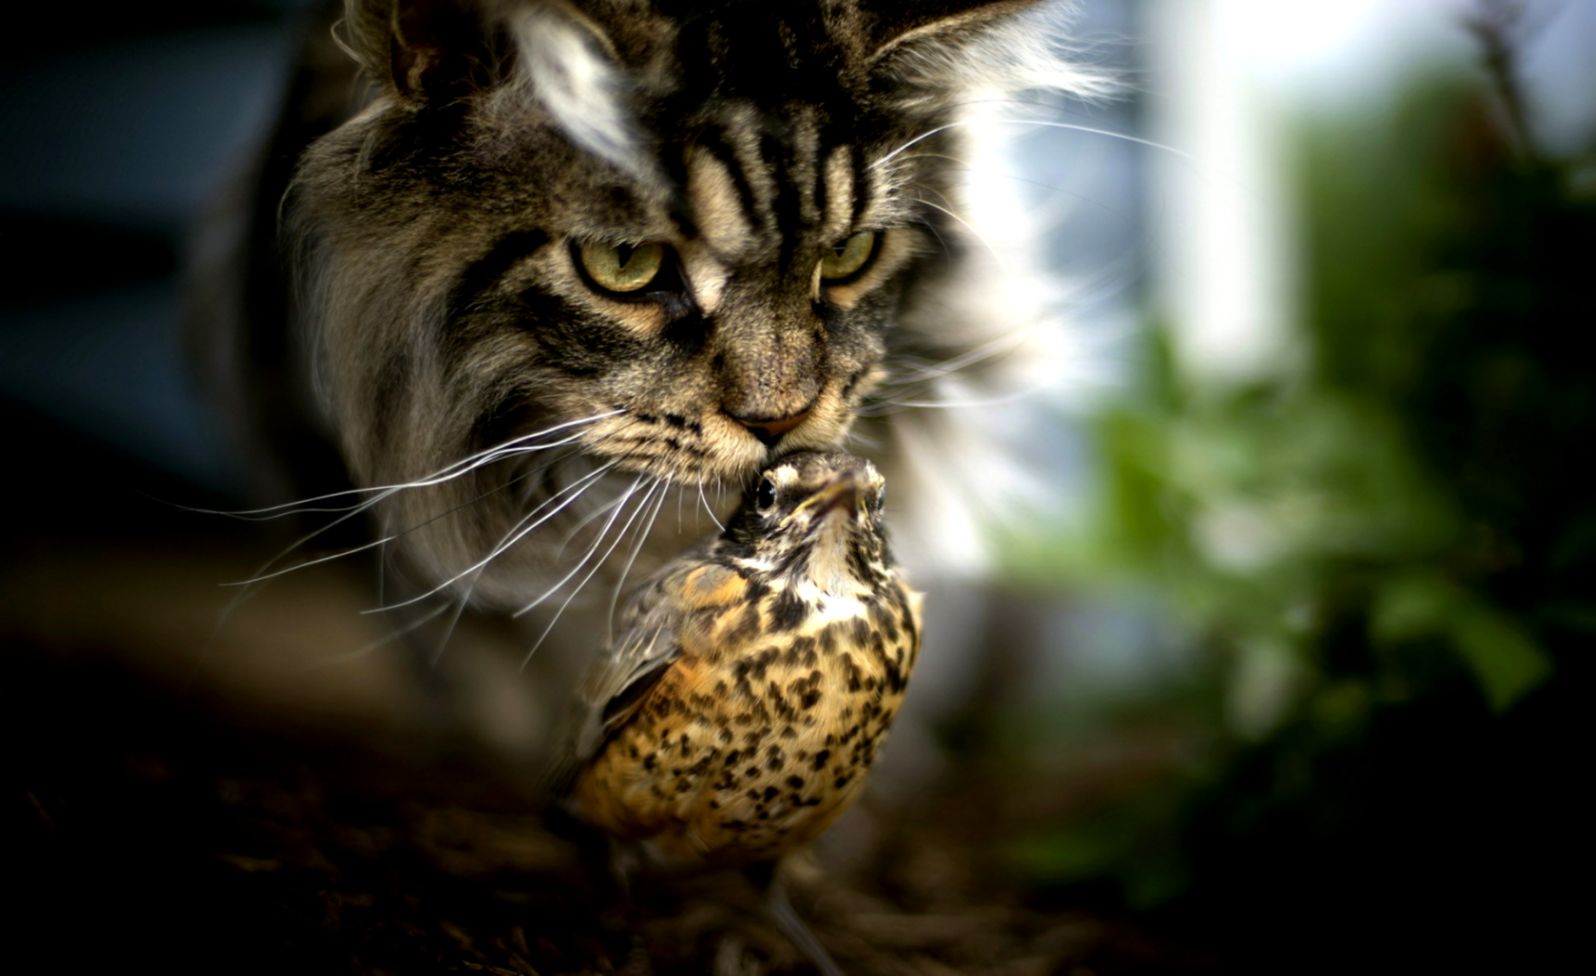 Awesome Hd Desktop Wallpapers Of Norwegian Forest Cat Sniffing Bird